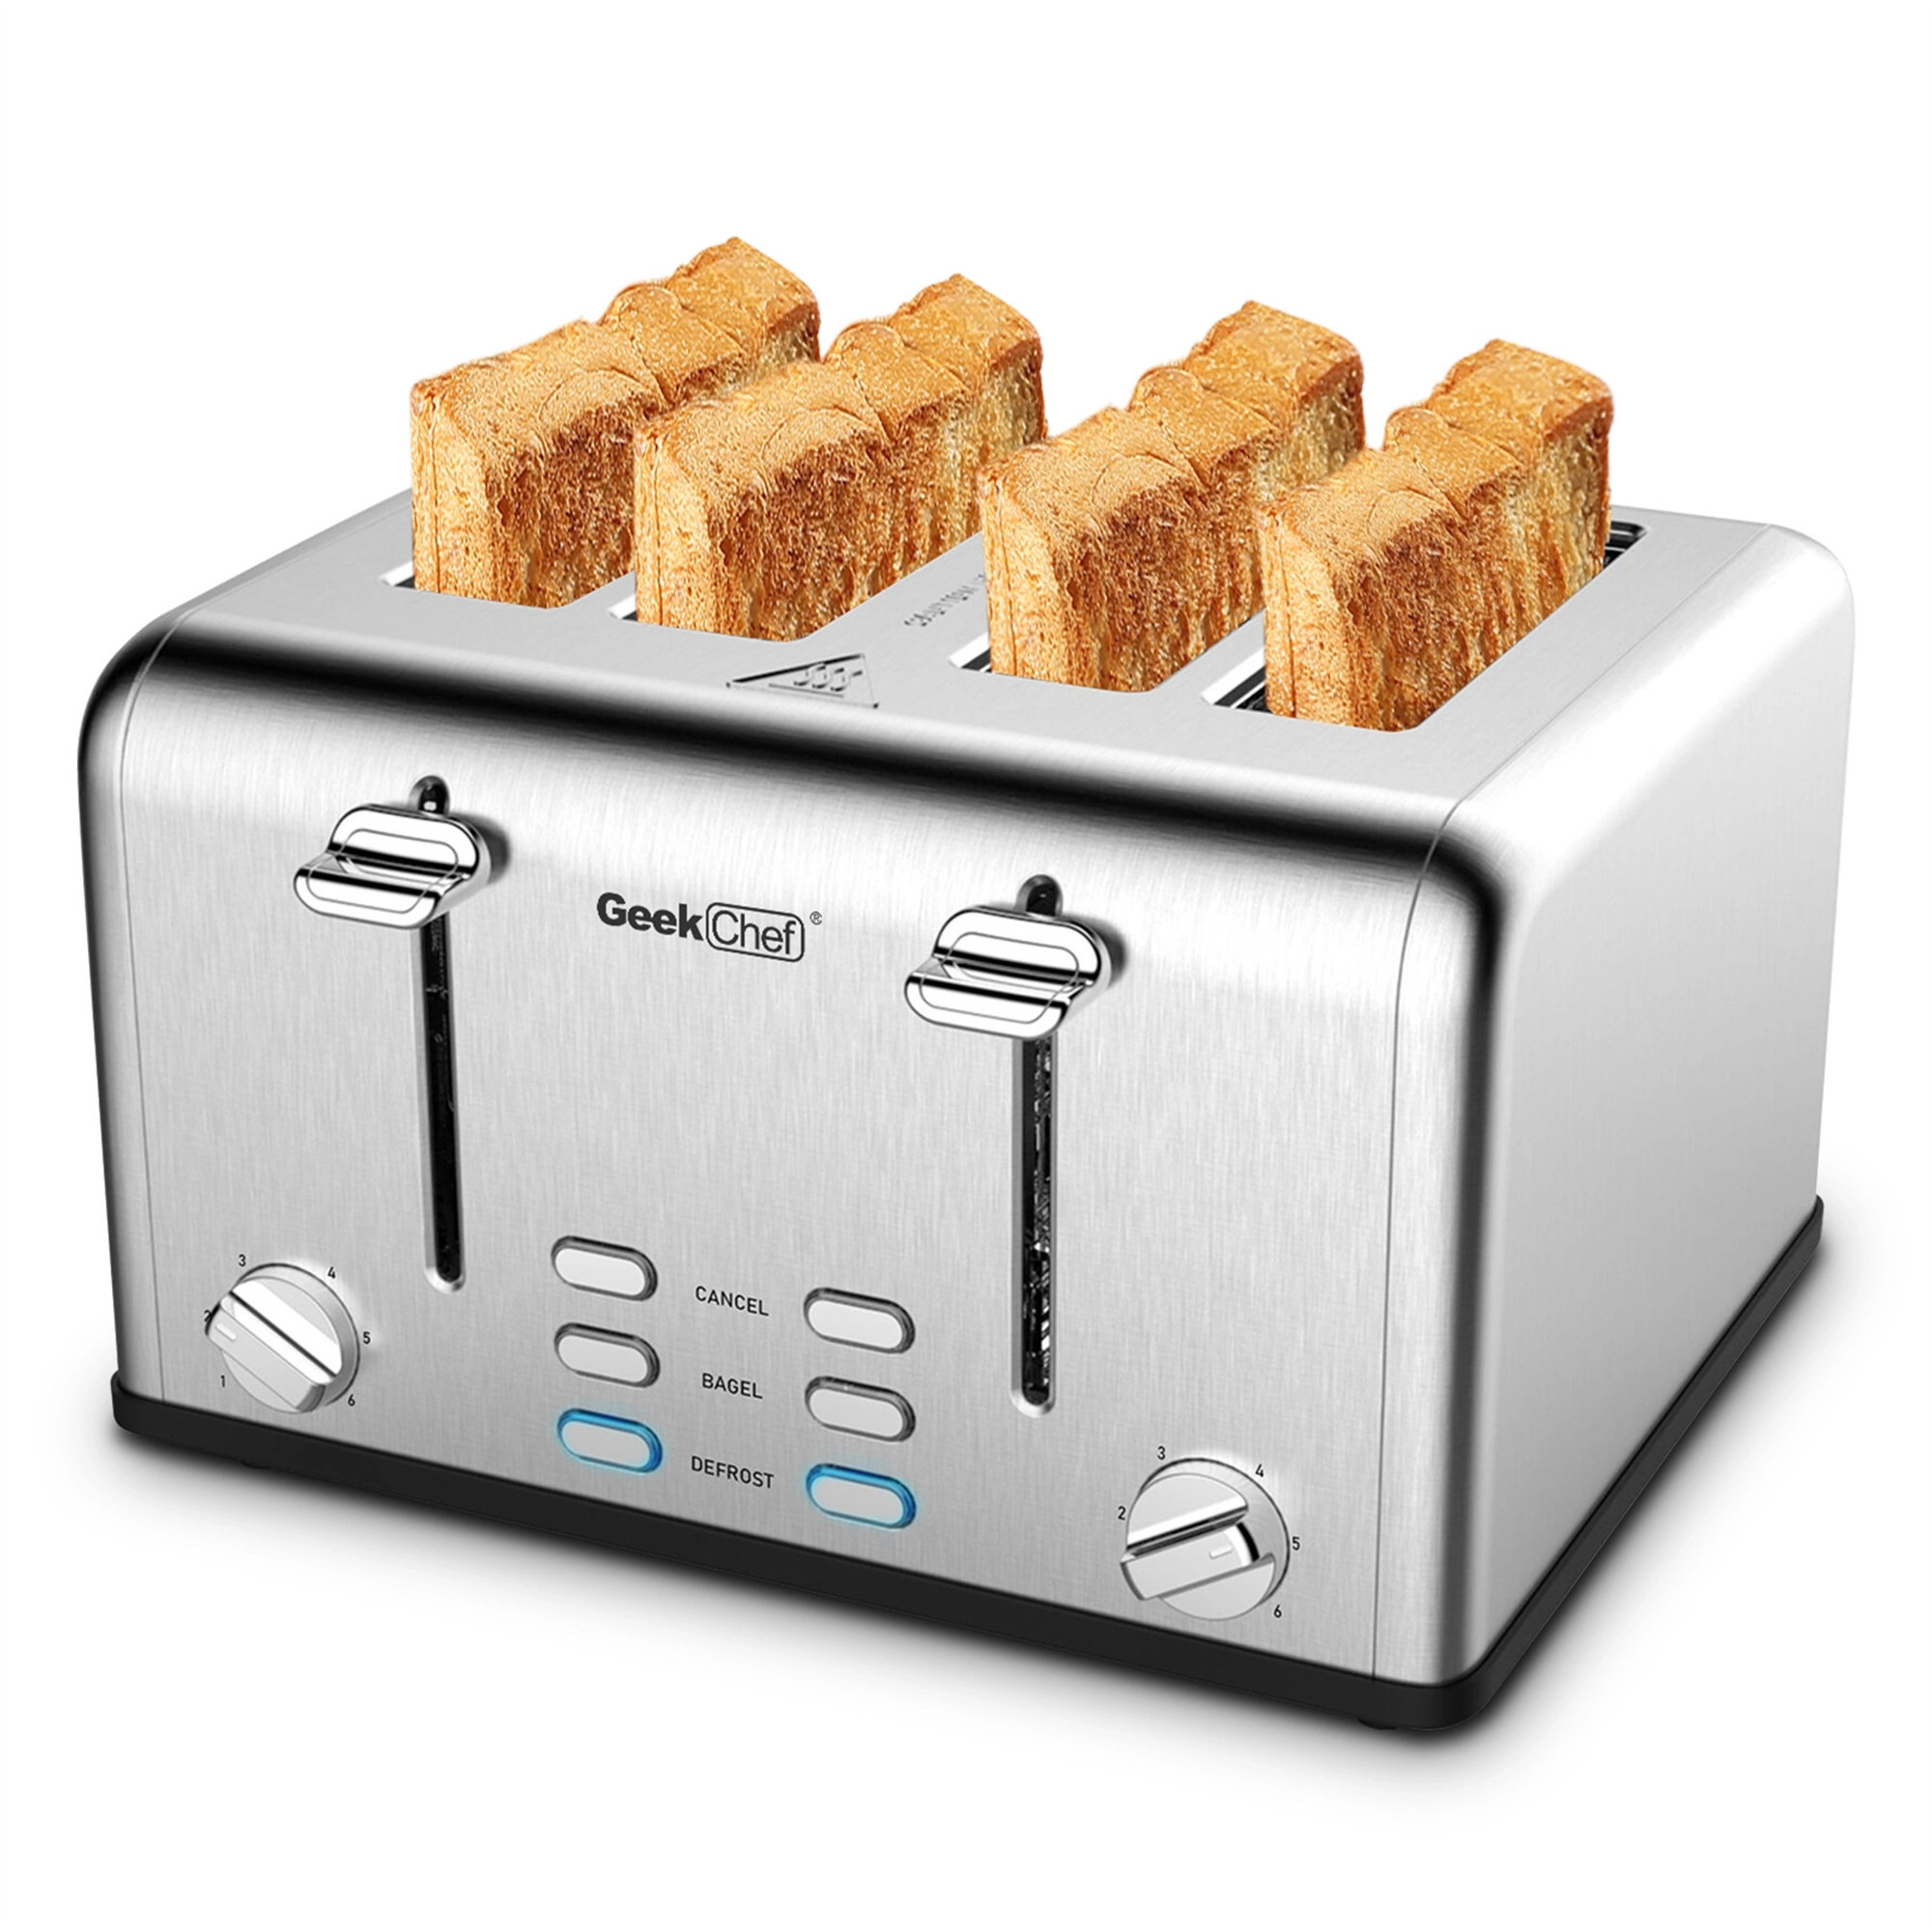 Kenmore 4-Slice Toaster, White Stainless Steel, Dual Controls, Extra Wide Slots, Bagel and Defrost